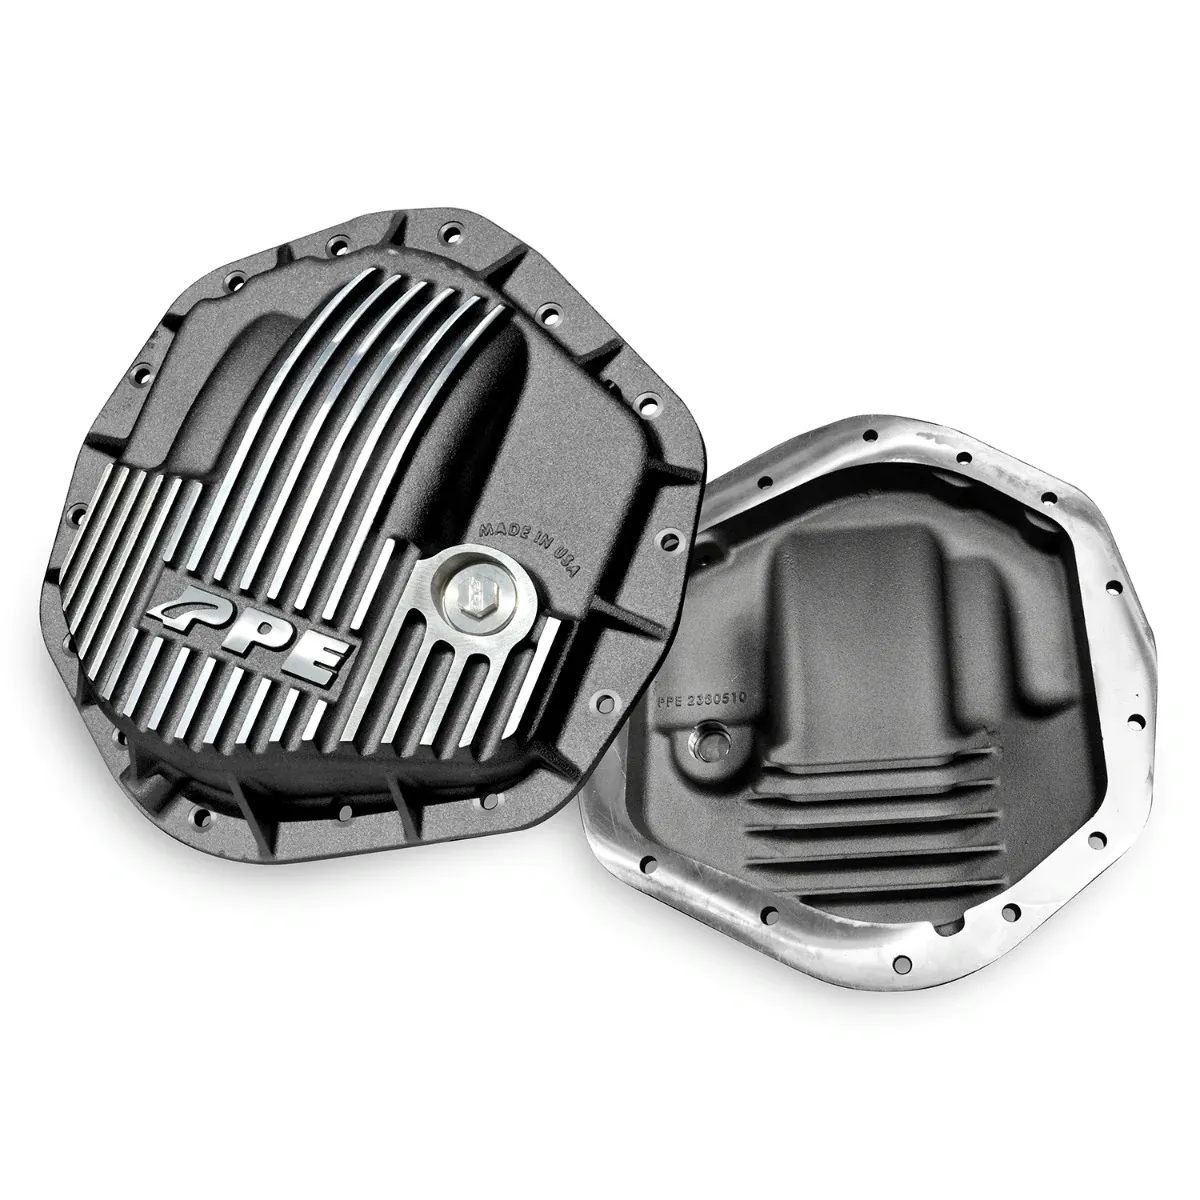 PPE - PPE Heavy Duty Brushed Aluminum Rear Differential Cover For 01-19 GM 2500/3500